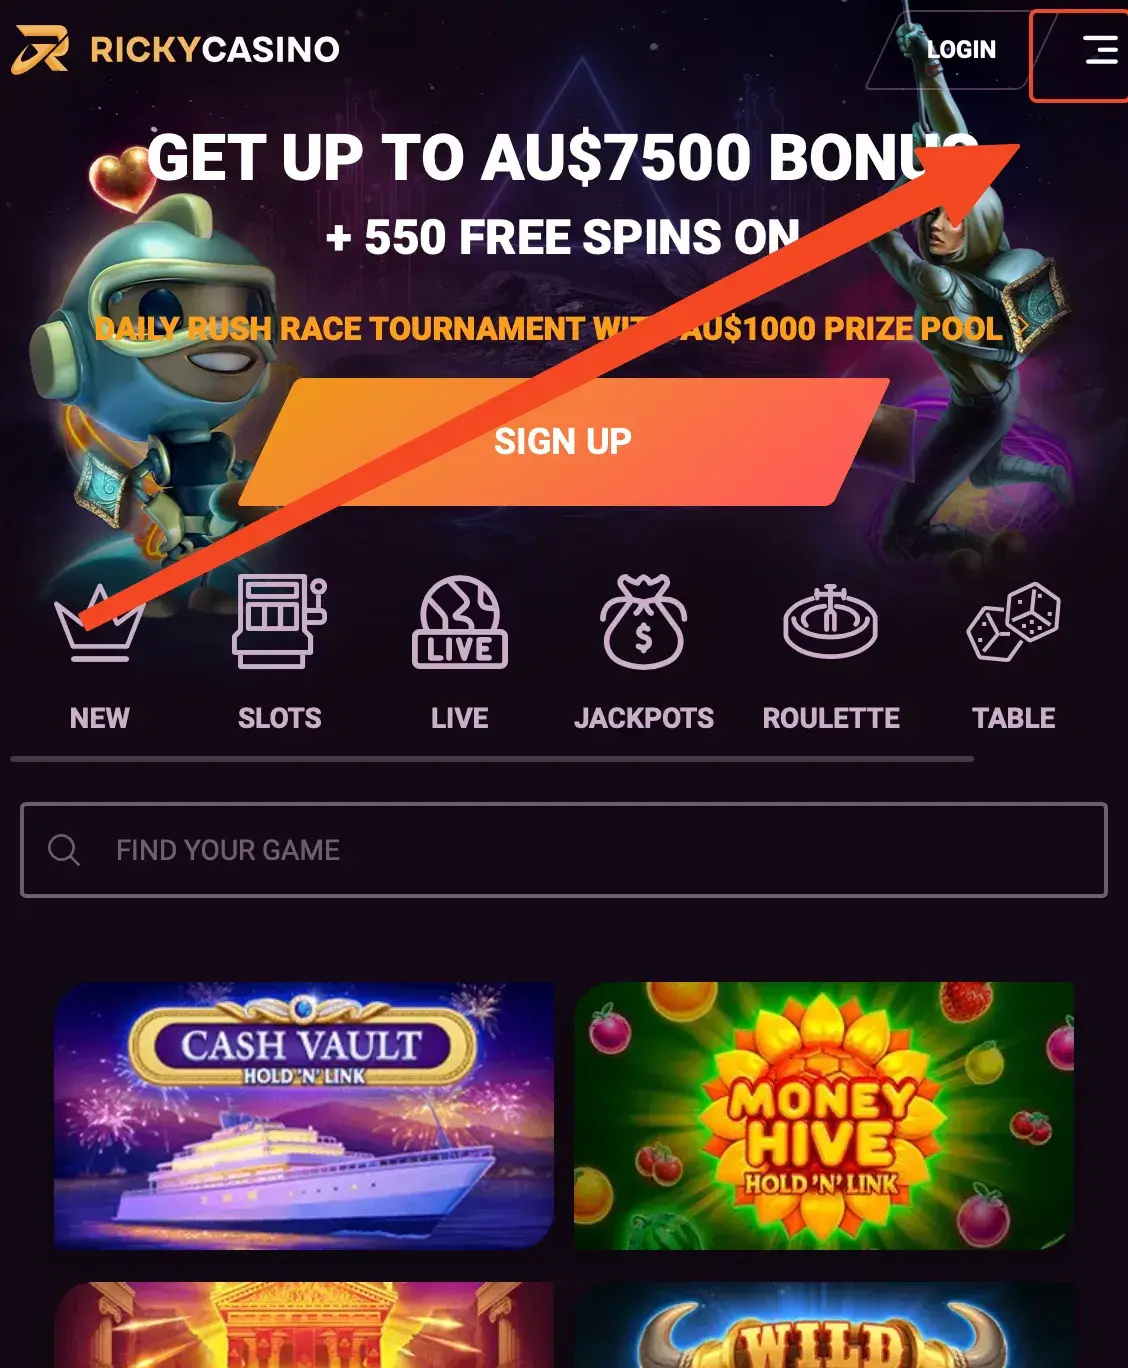 Where to download Ricky Casino app